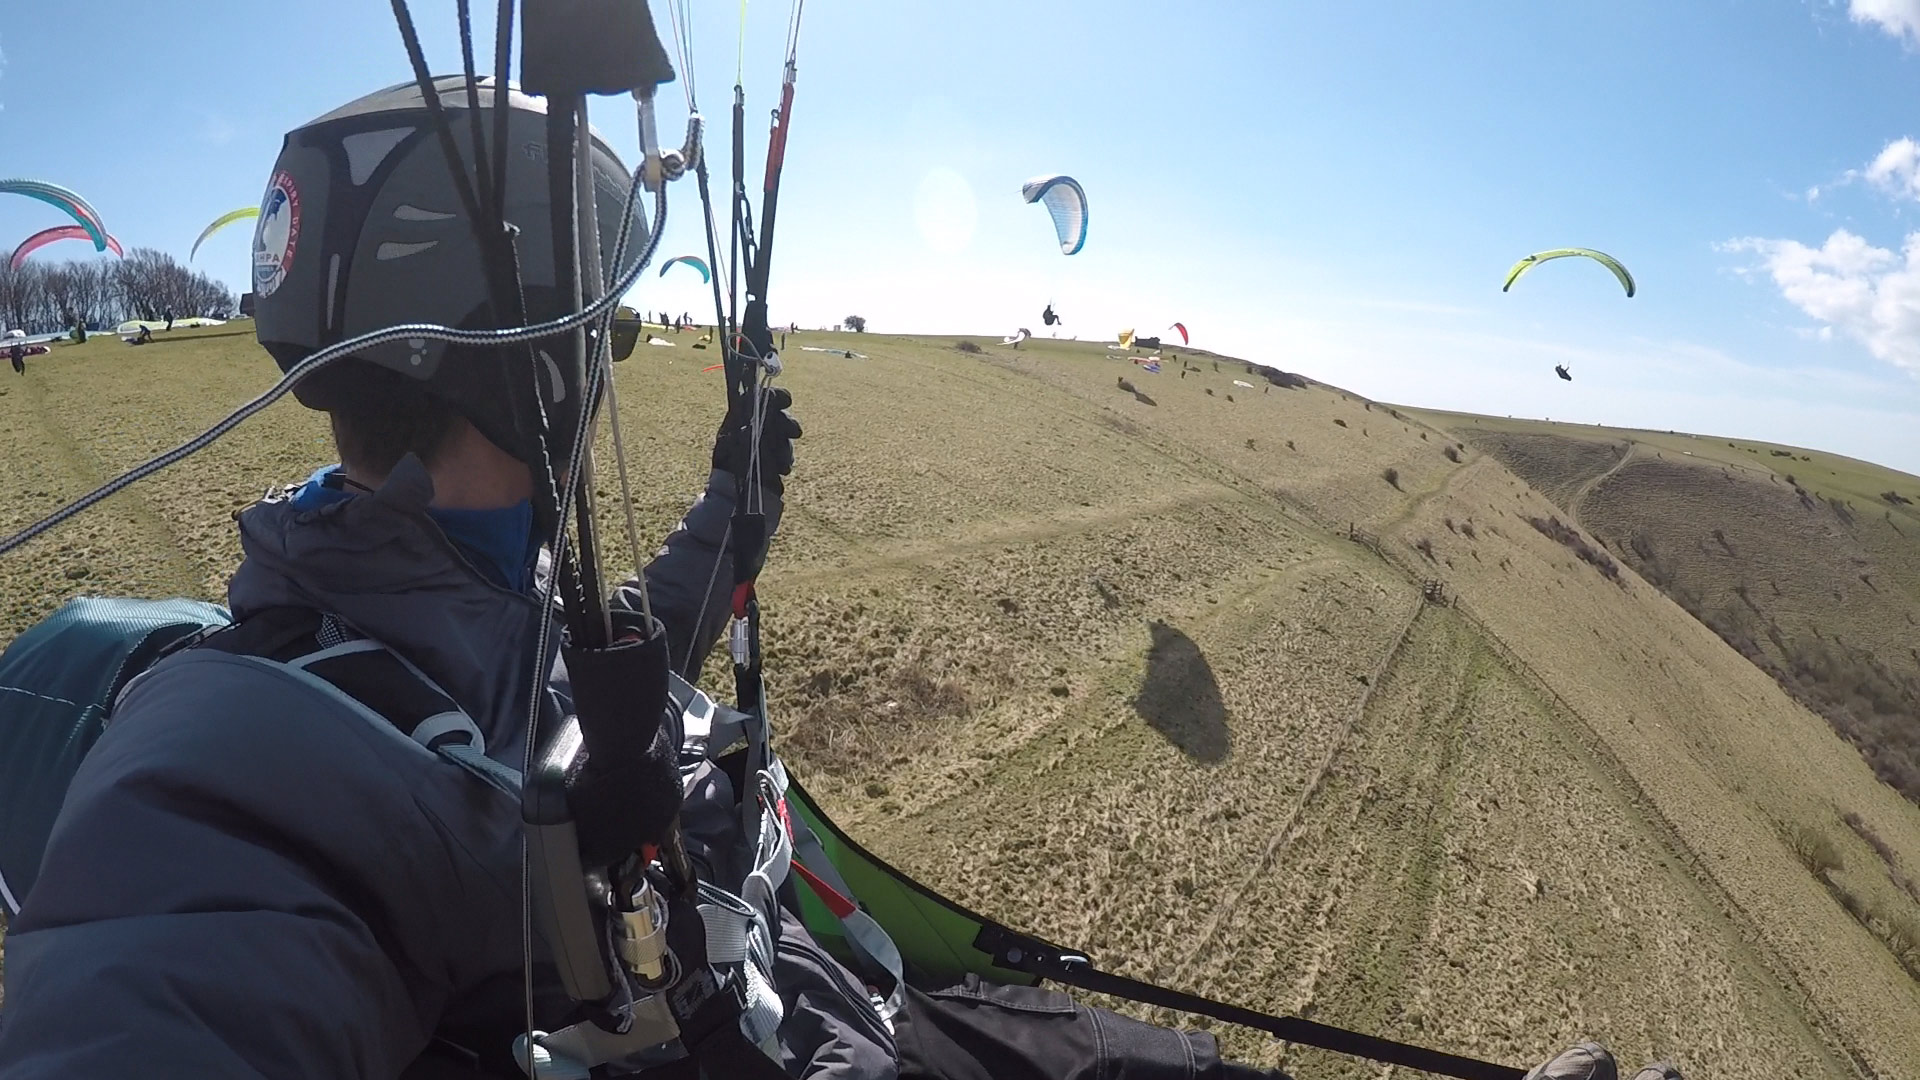 How to fly in paragliding traffic: look ahead